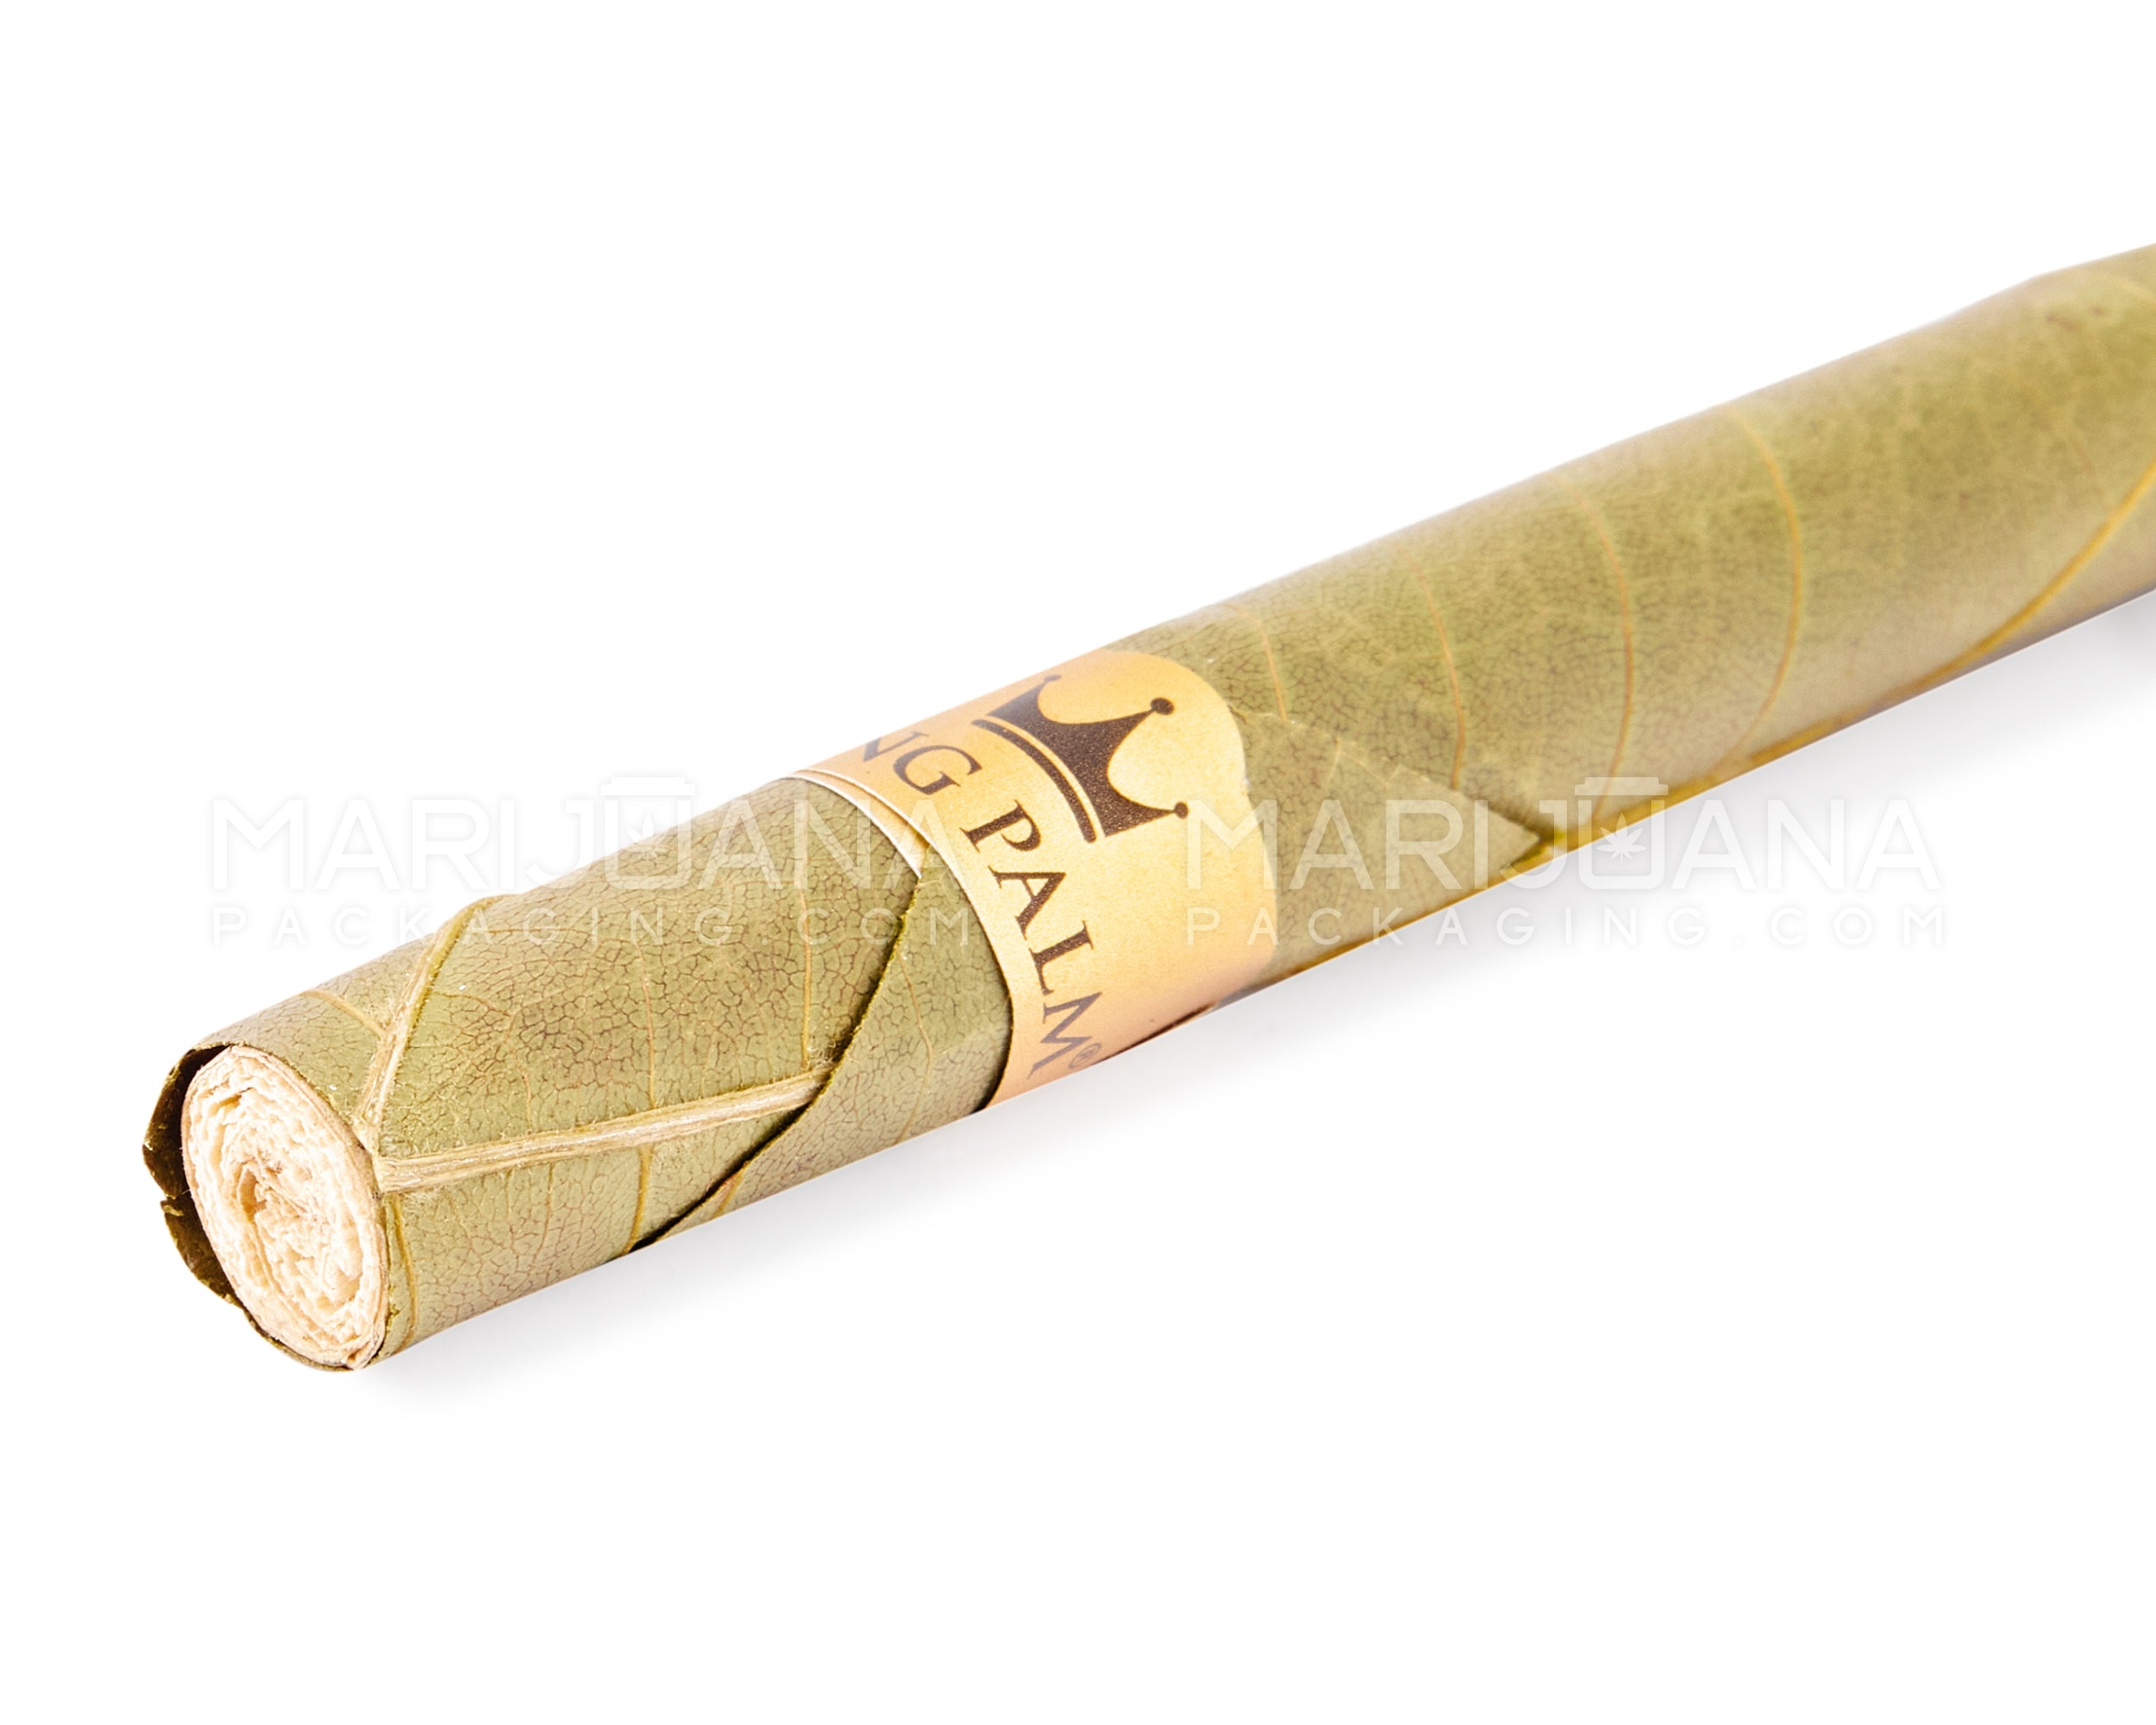 KING PALM | 'Retail Display' Mini Green Natural Leaf Blunt Wraps | 84mm - Pine Drip - 15 Count - 6